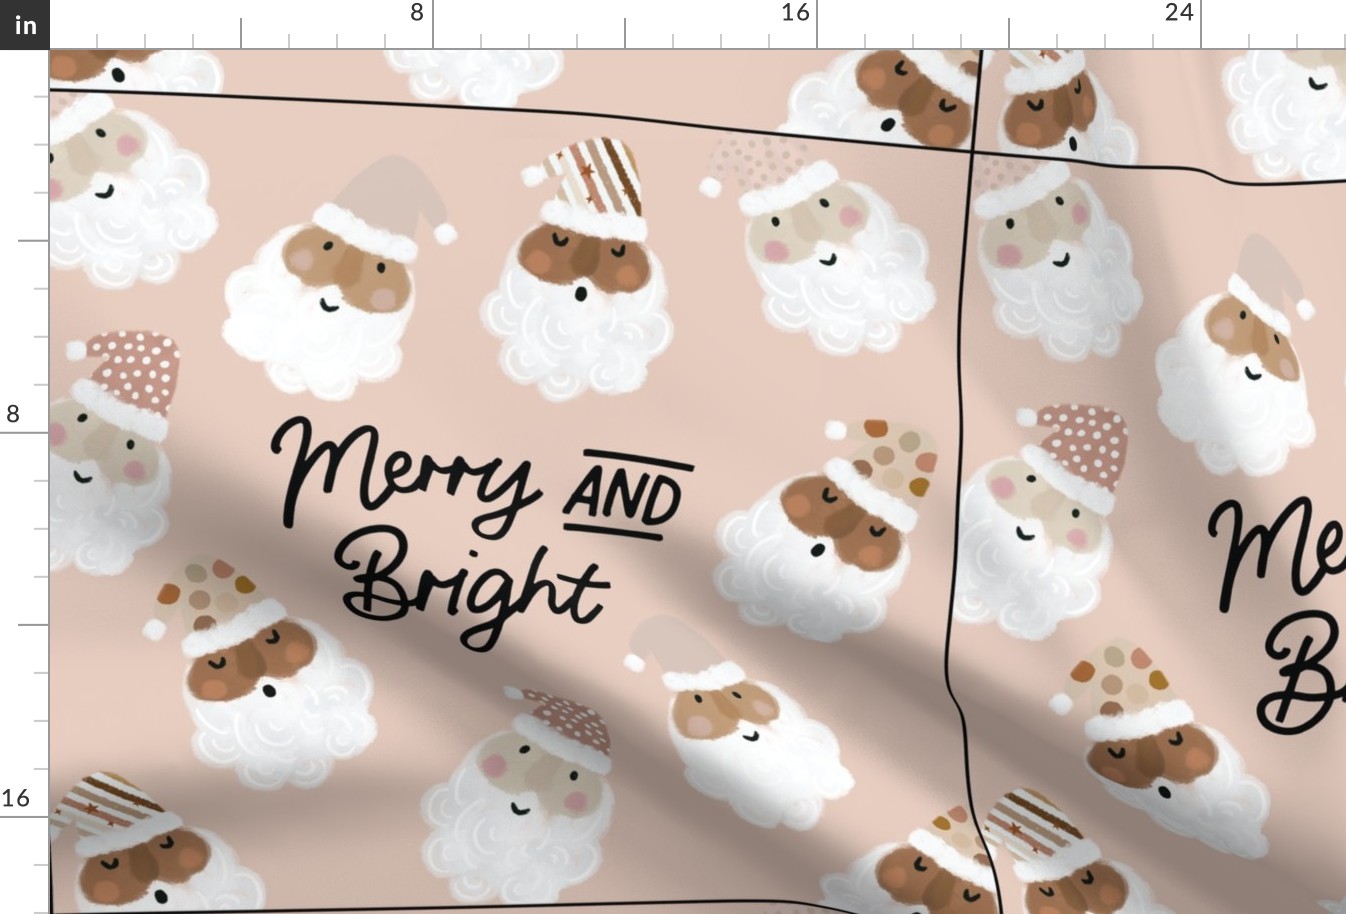 6 loveys: merry and bright on christmas blushy